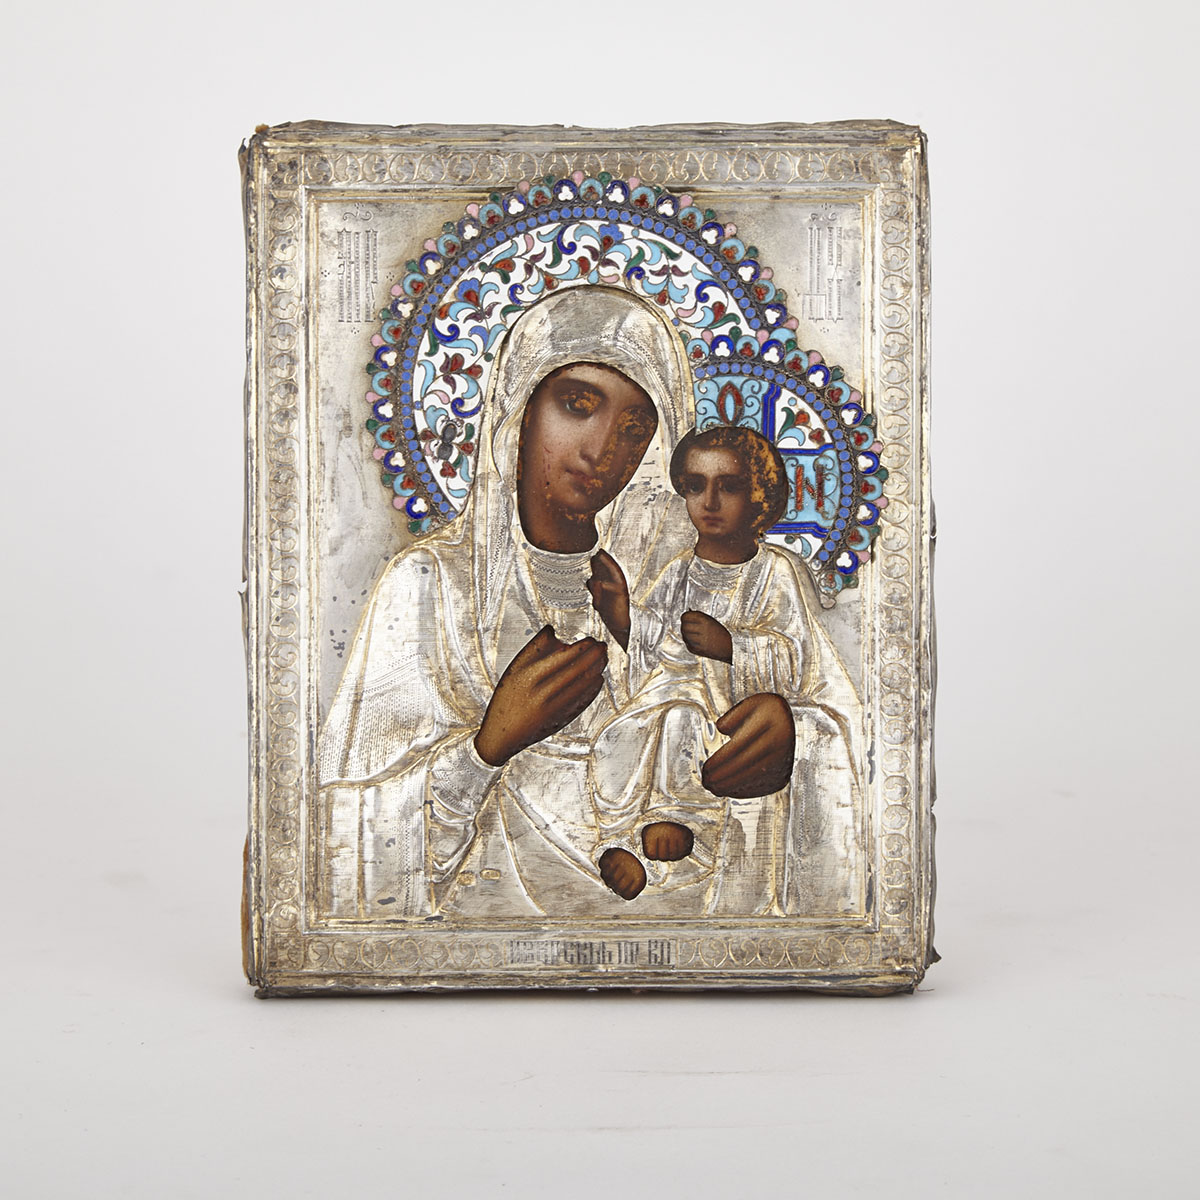 Russian Silver-Gilt and Cloisonné Enamel Icon of The Mother of God, Moscow, c.1908-17